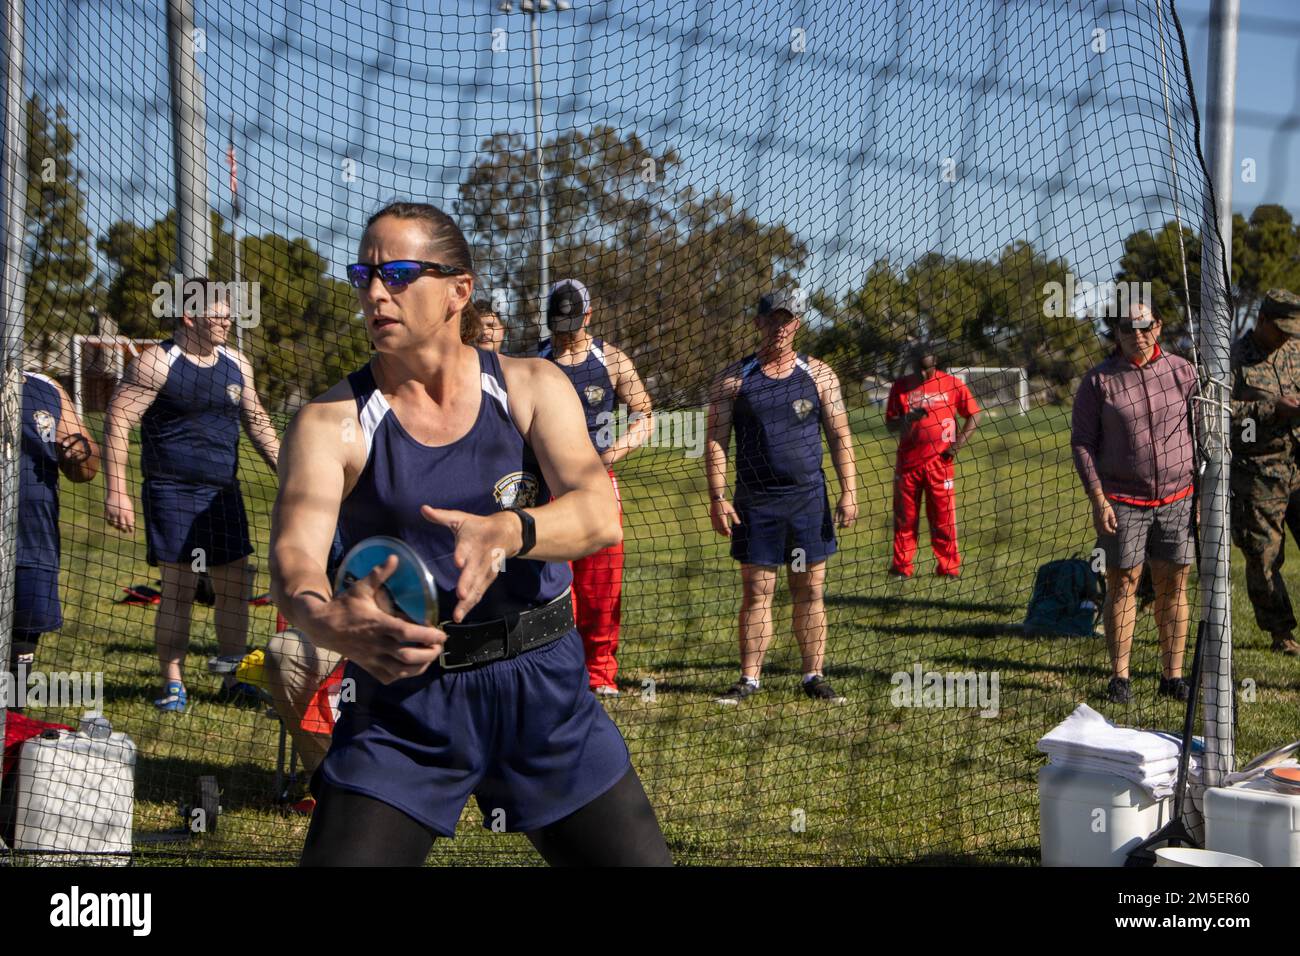 Retired U.S. Marine Corps Maj. Lisa Doring prepares to throw a discus at Page field house during the 2020 West Coast Marine Corps Trials (MCT) track and field event on Marine Corps Base Camp Pendleton, California, March 8, 2022. The MCT is an adaptive sports event involving more than 75 wounded, ill, or injured Marines, Sailors, veterans, and international competitors. Stock Photo